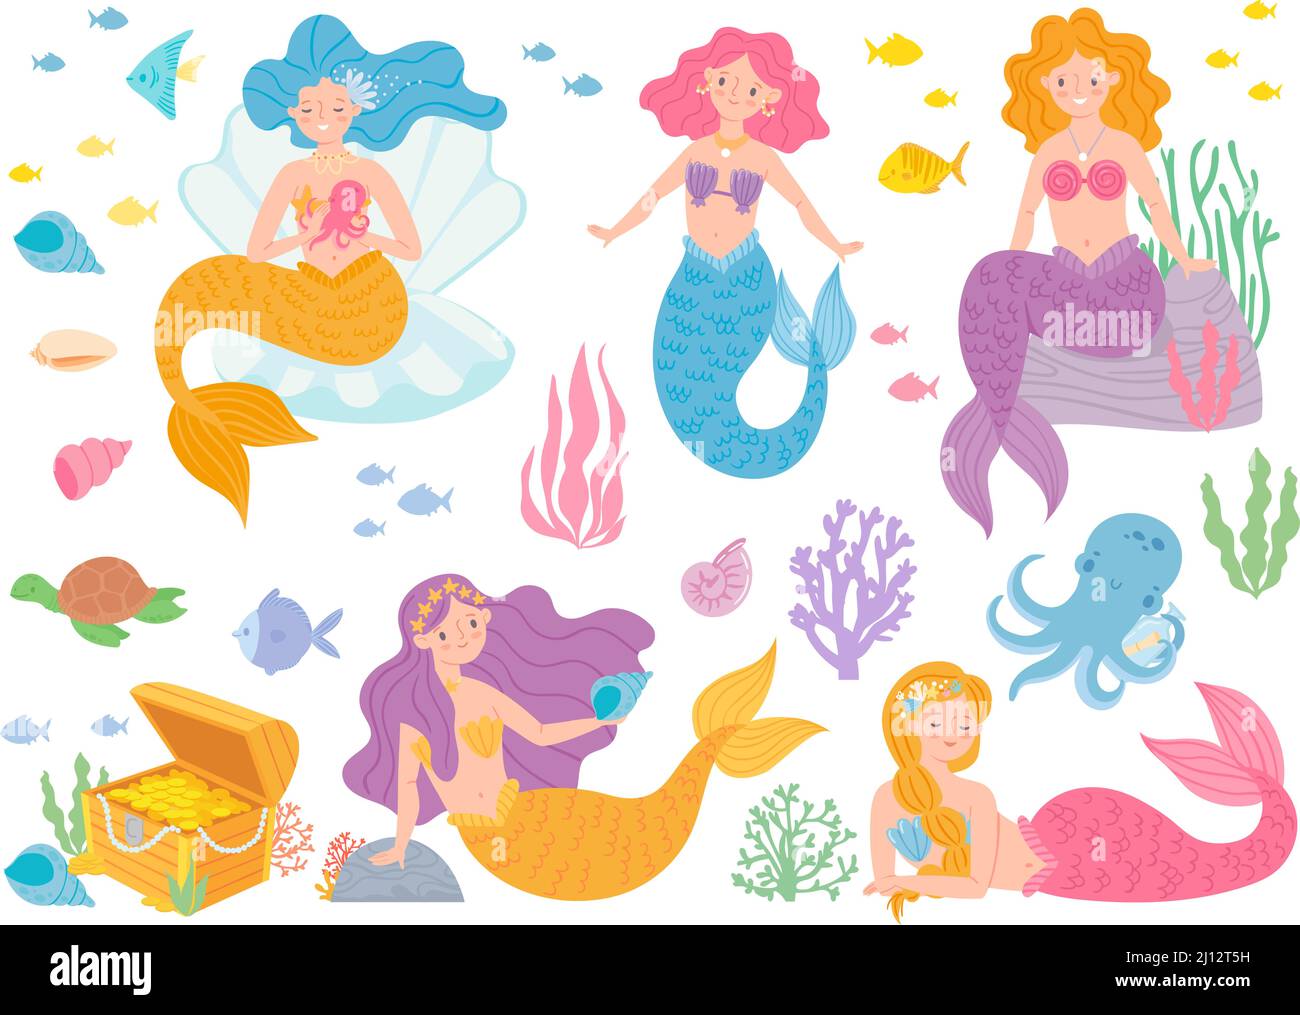 Cute mermaids. Beautiful girls living underwater with fish, turtle, corals and octopus. Mythical creatures Stock Vector